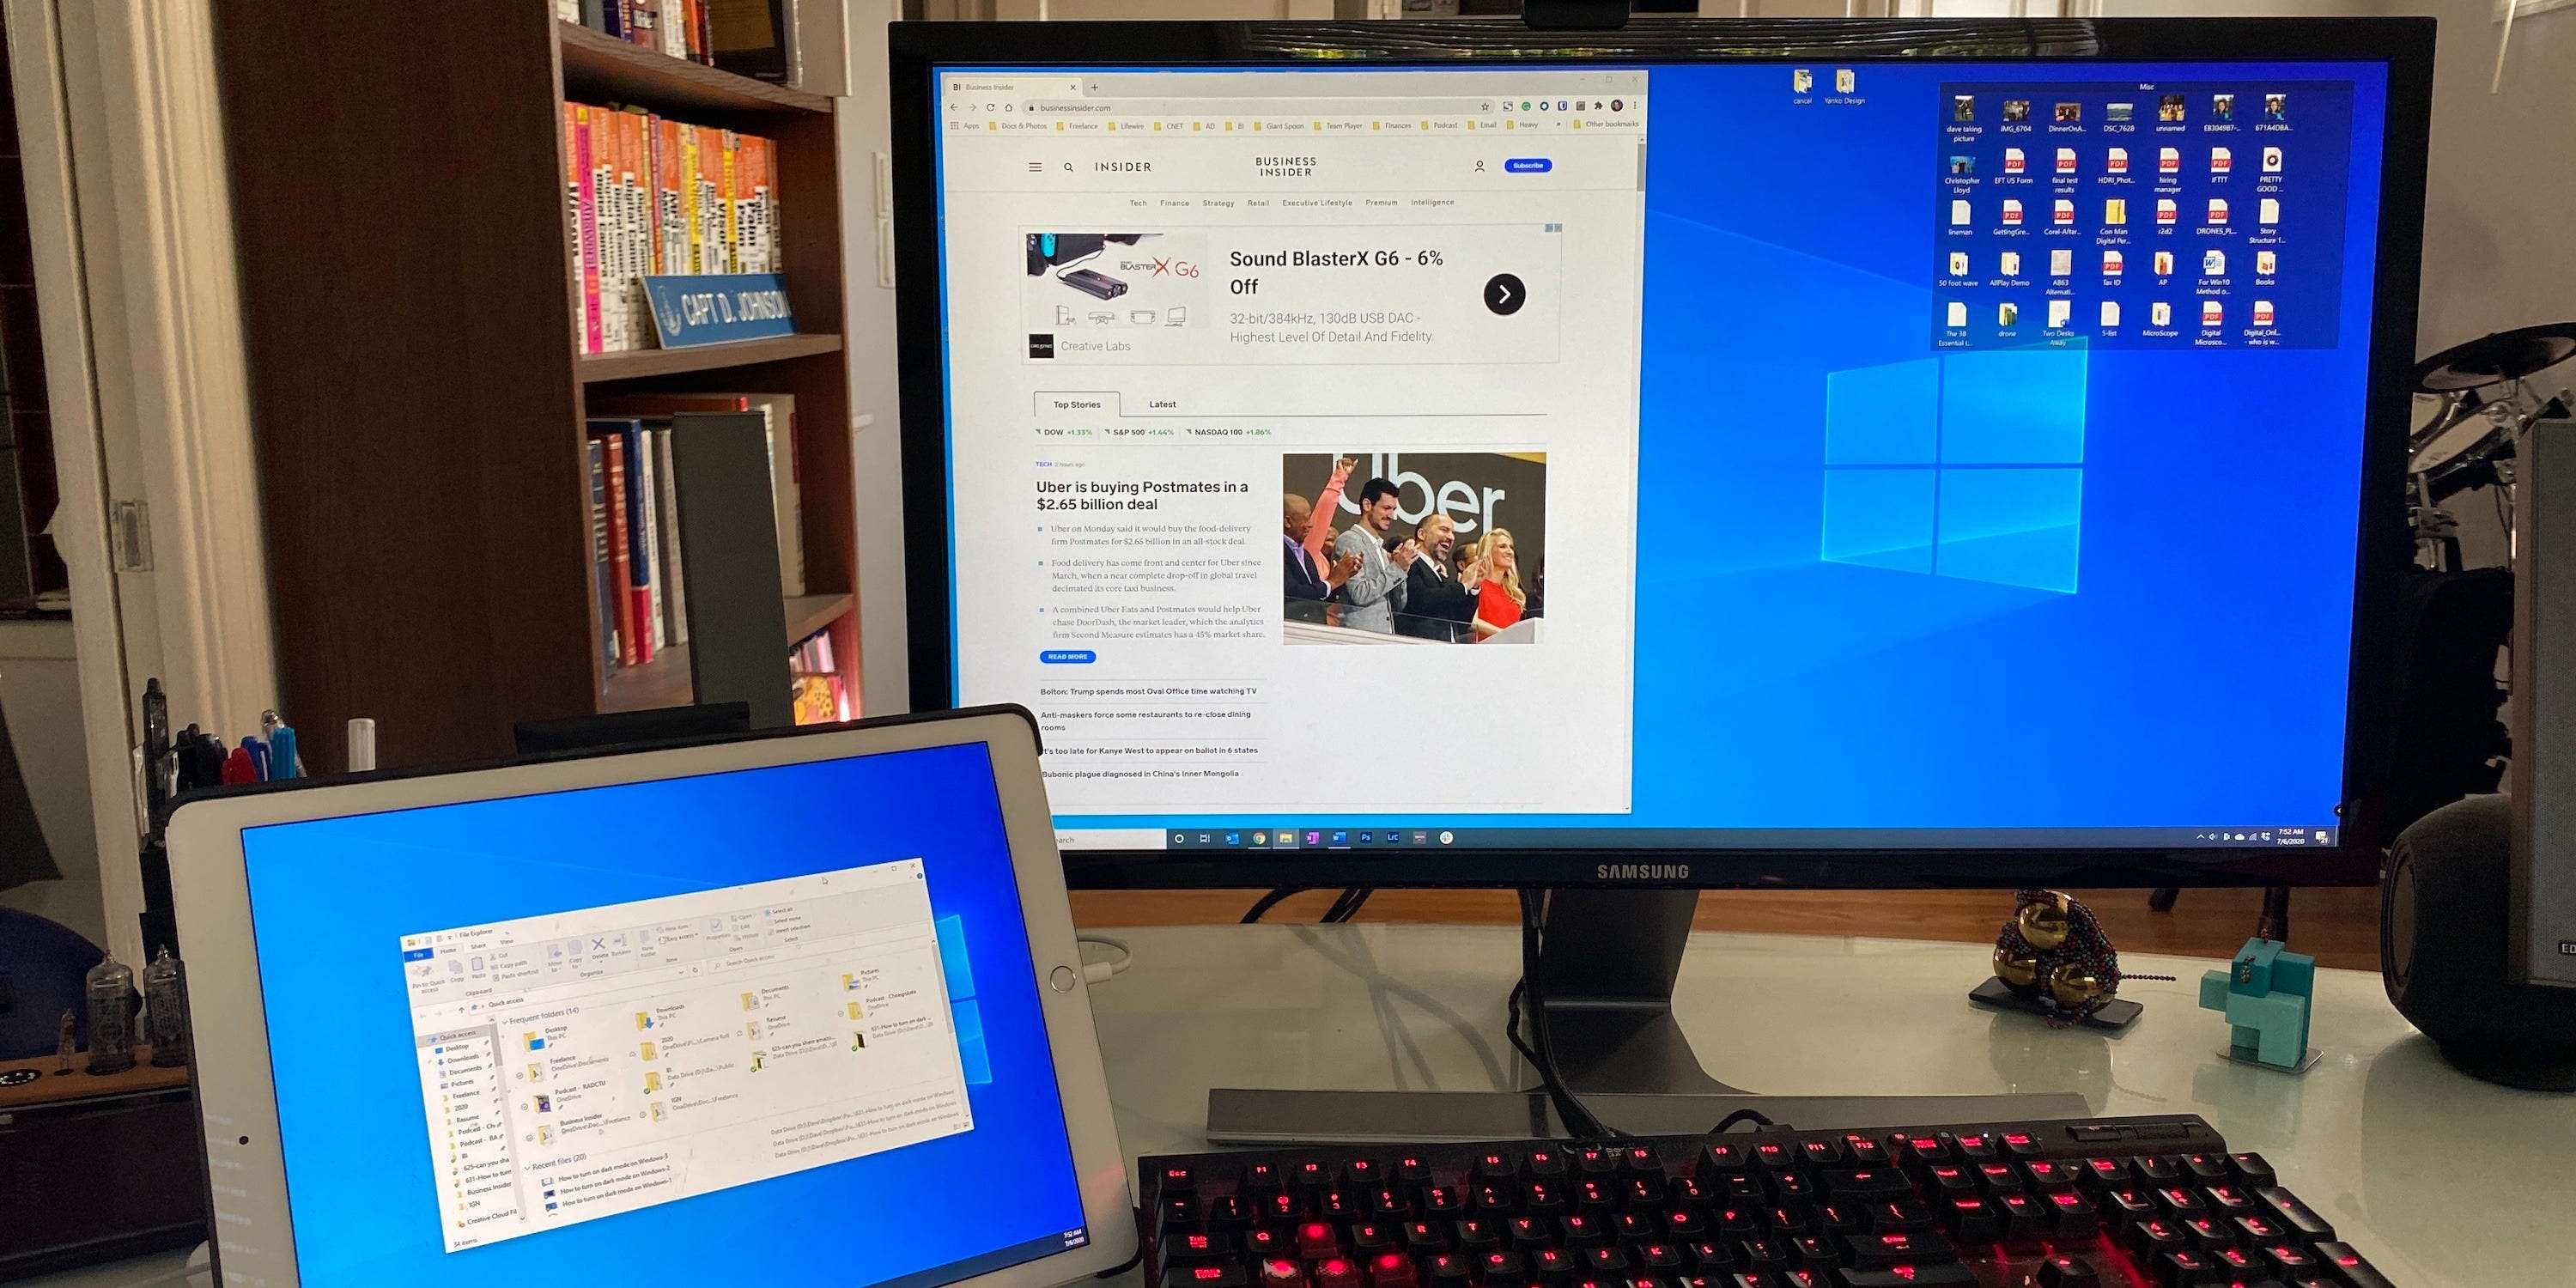 How To Use An Ipad As A Second Monitor For A Windows Pc Business Insider